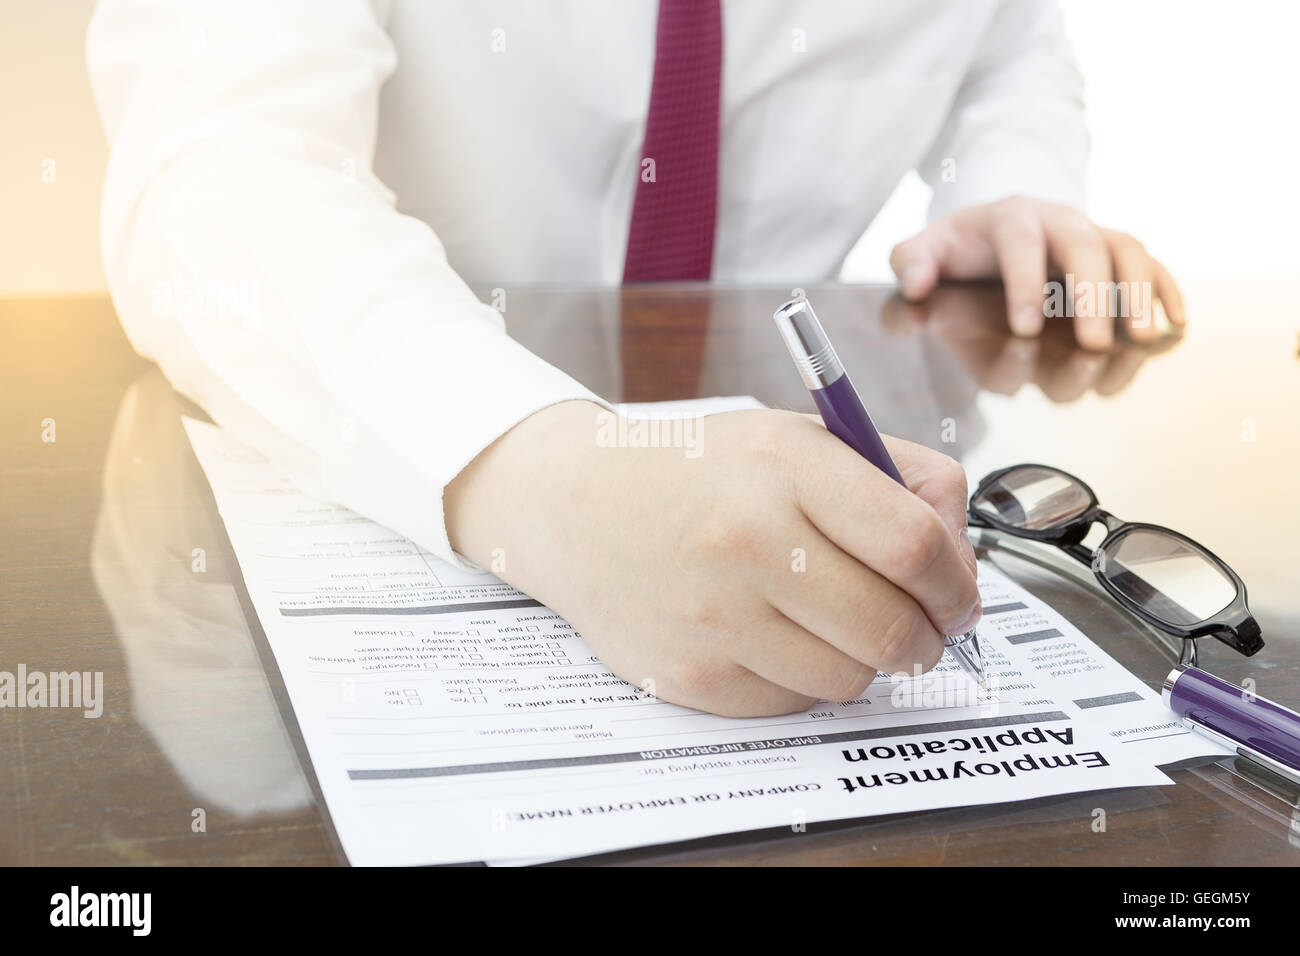 Businessman fill in Employment Application form with pen. job vacancy concept or business employment concept. Stock Photo